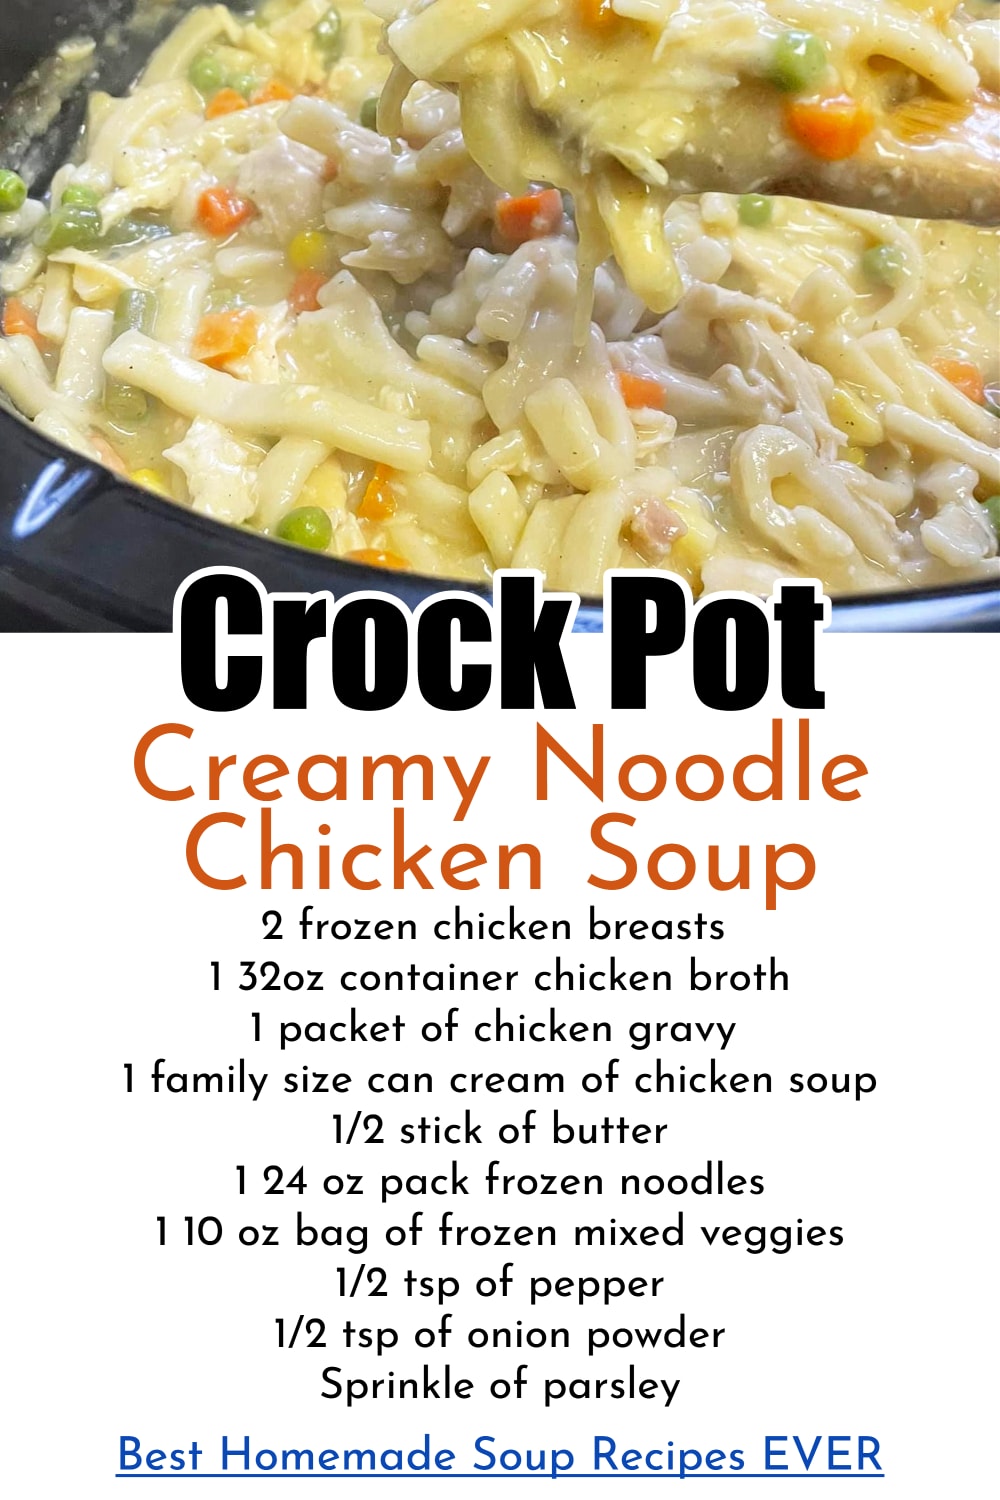 Homemade soup recipes - crock pot creamy chicken noodle soup with frozen chicken breasts and frozen noodles made in your slow cooker - best homemade soup recipes EVER